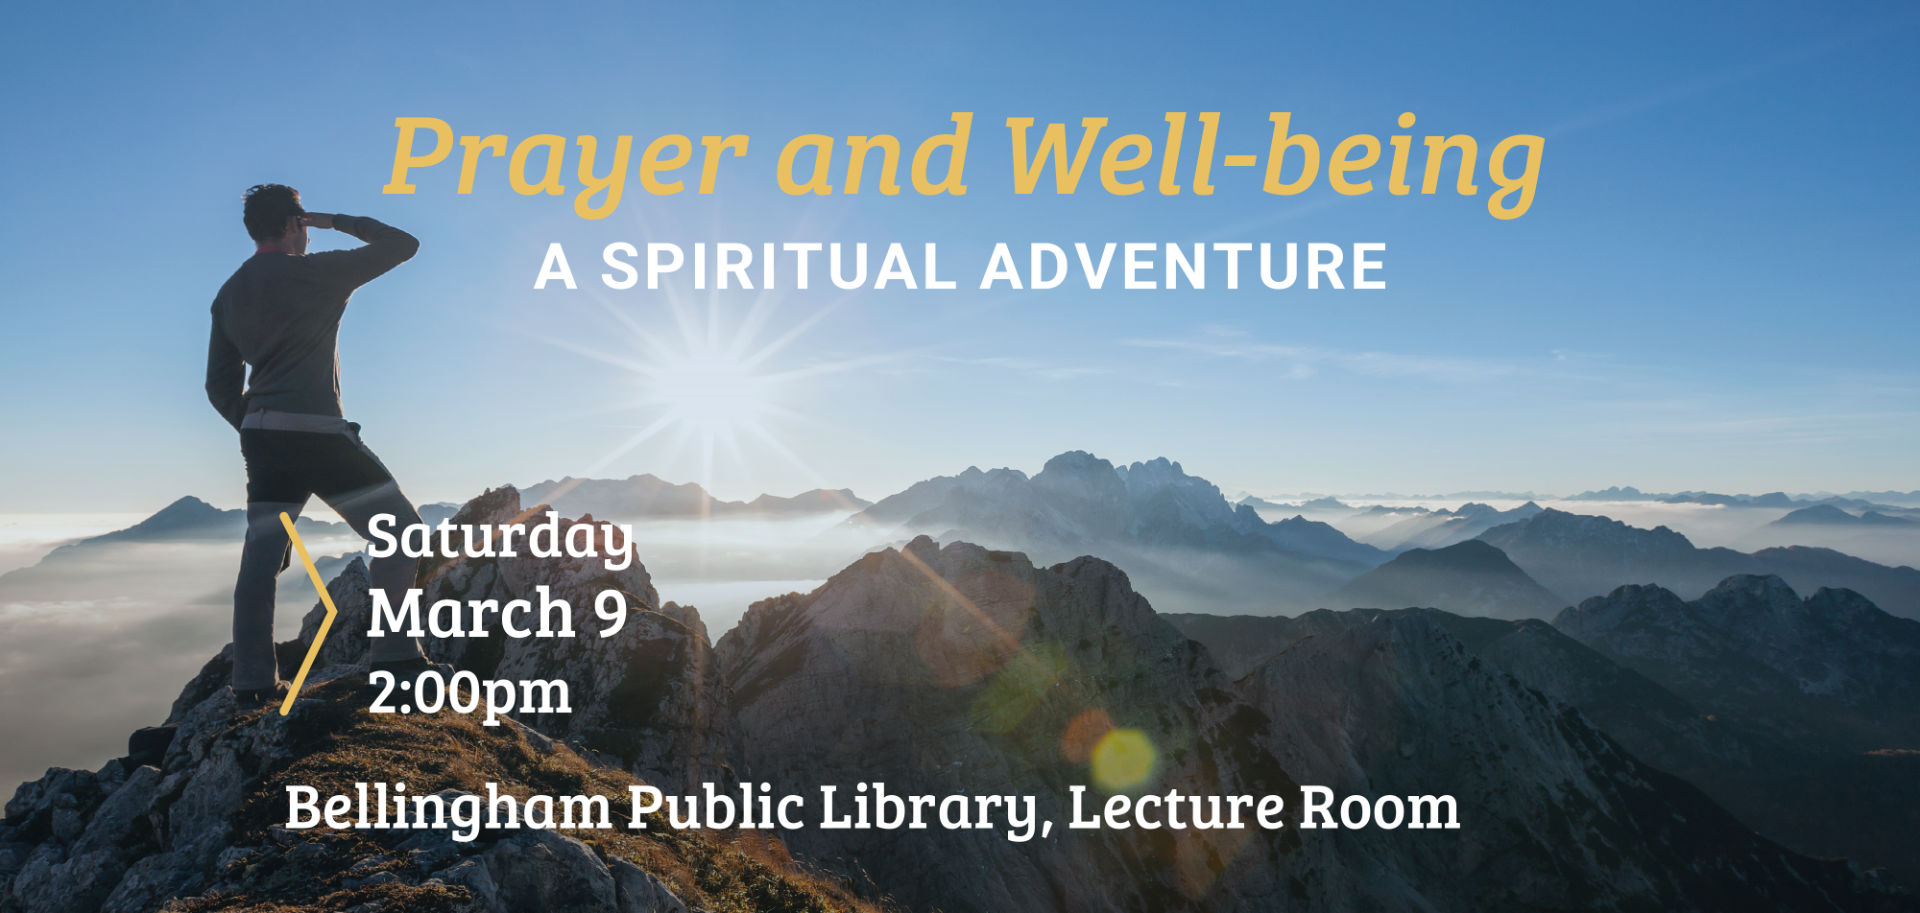 Prayer and Well-being - A Spiritual Adventure (Saturday March 9 in Bellingham Public Library, Lecture Room)